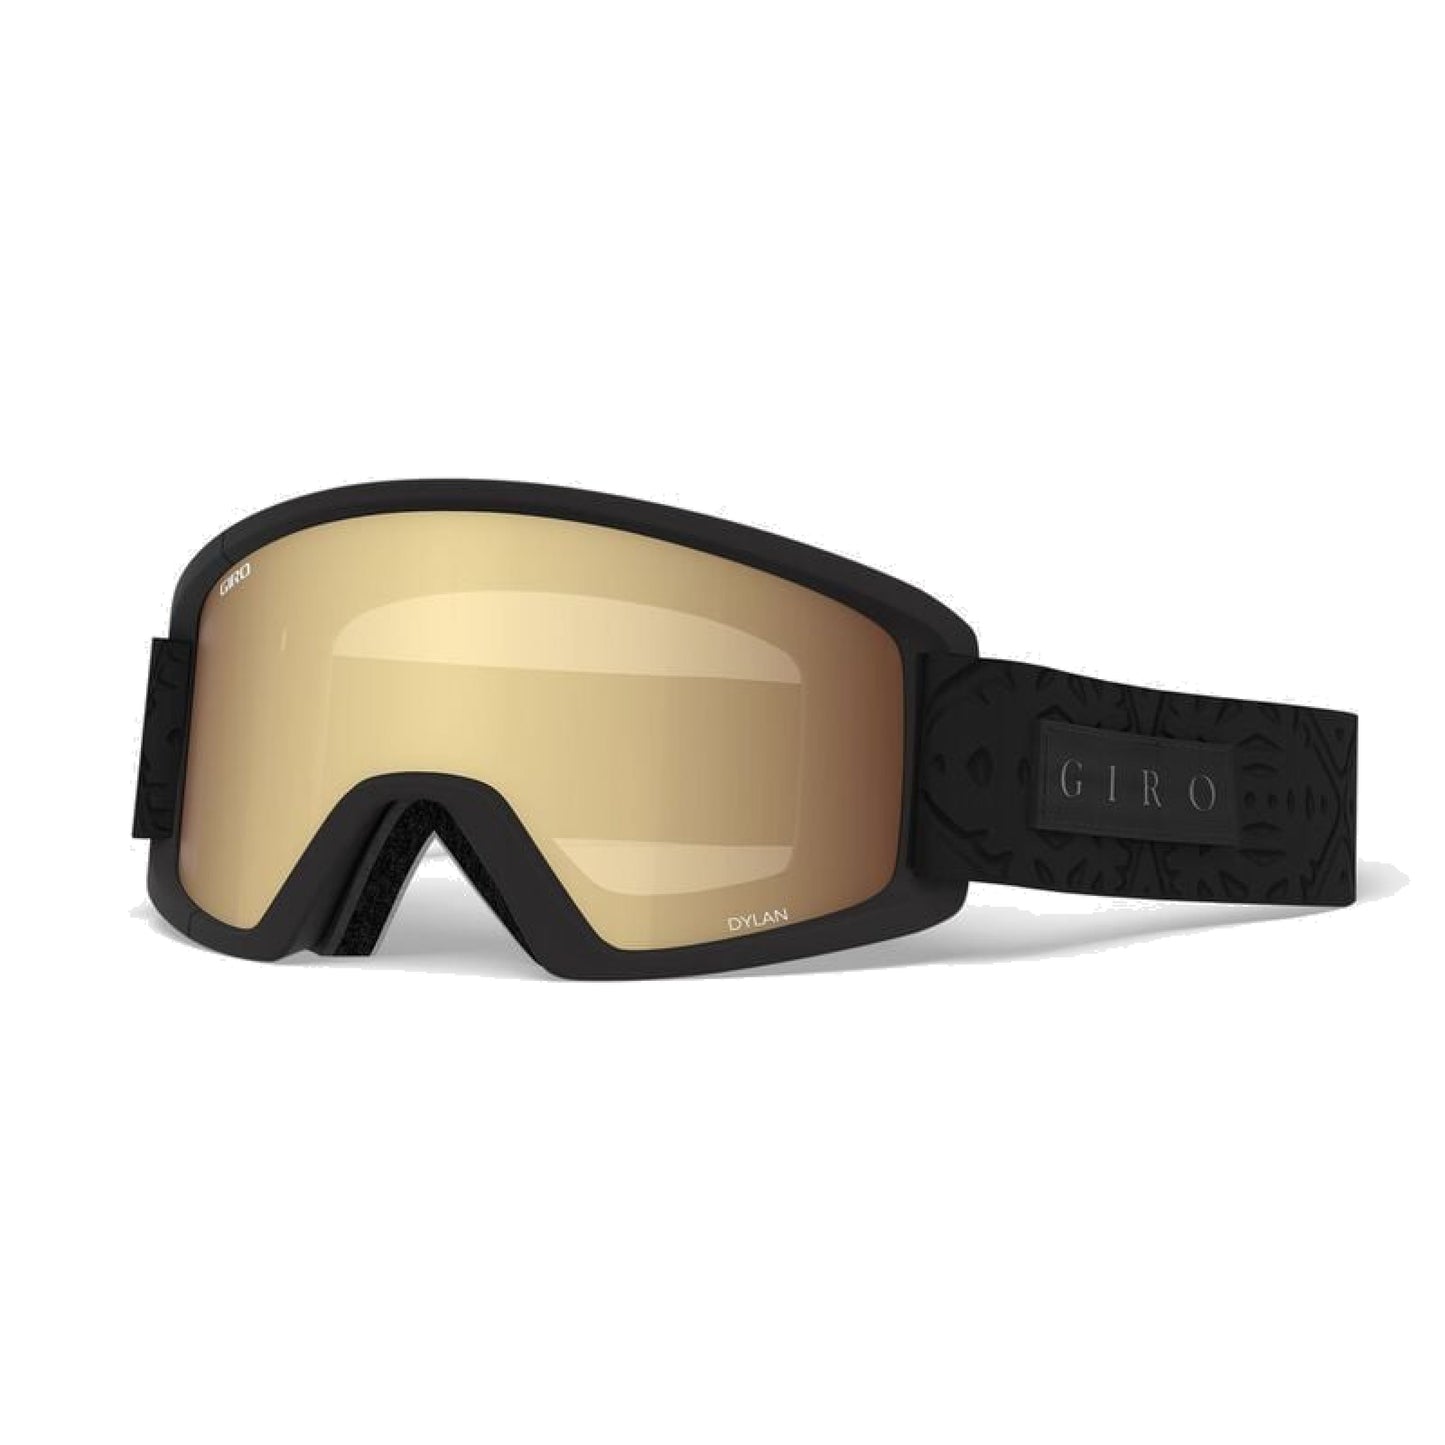 Giro Women's Dylan AF Snow Goggles Black Flake Amber Gold Snow Goggles